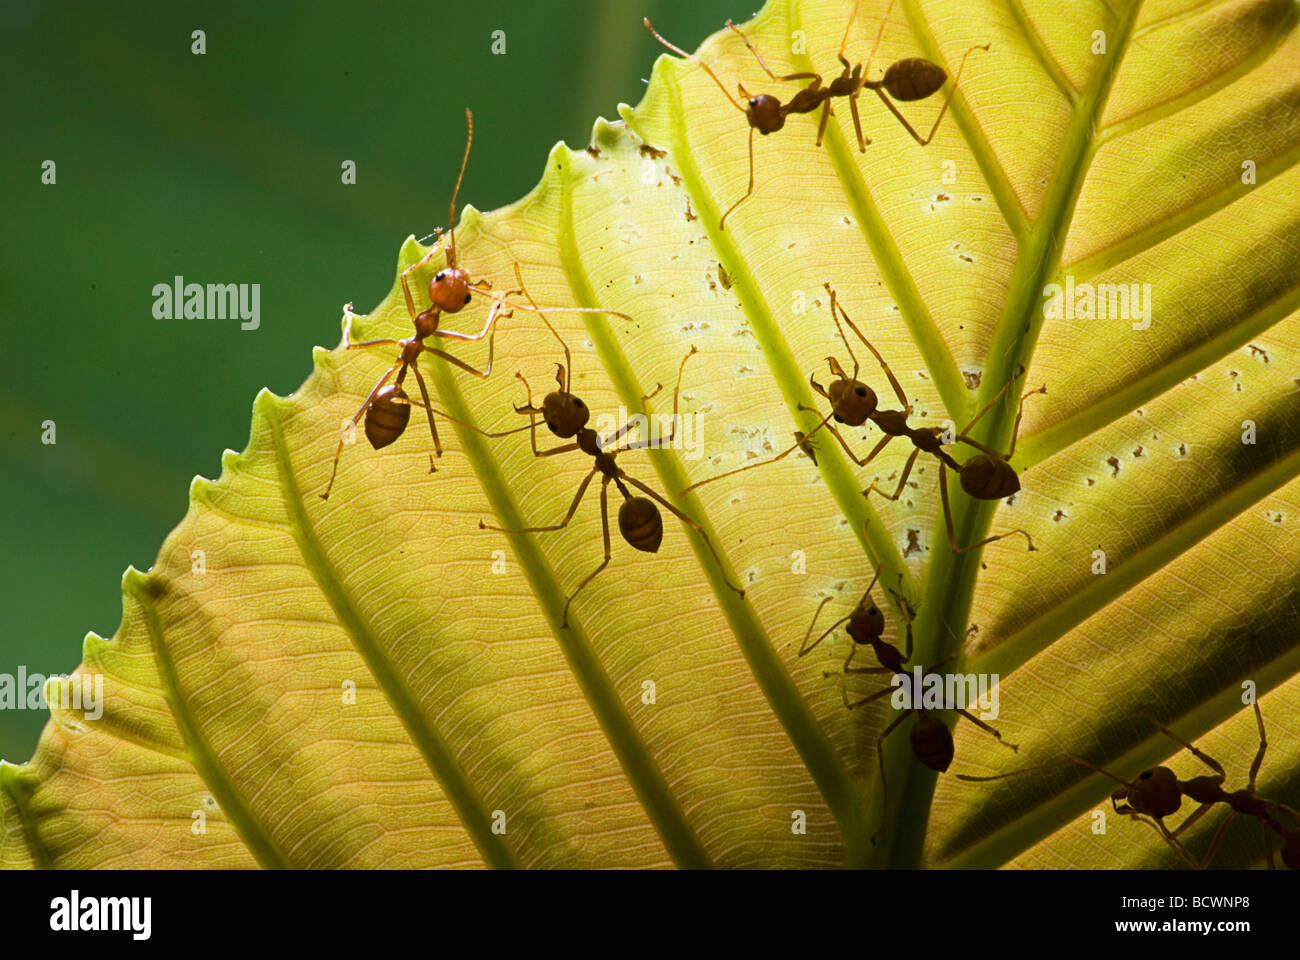 Extreme close-up of weaver ants on a piece of leaf Stock Photo